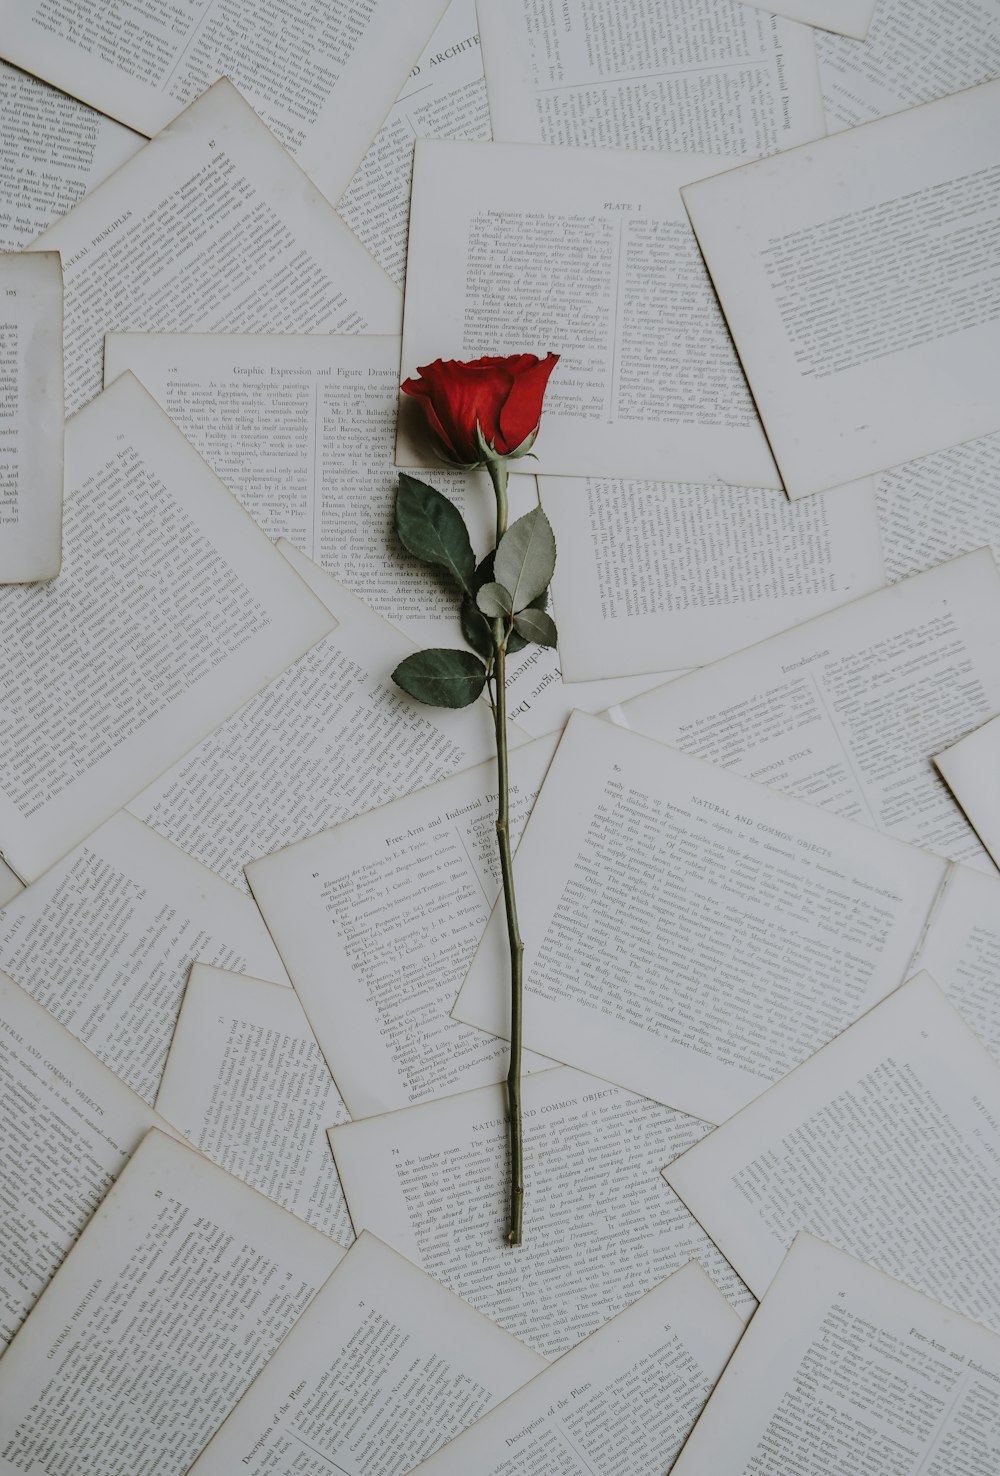 Hq Rose On Book Pictures Download Free Images On Unsplash